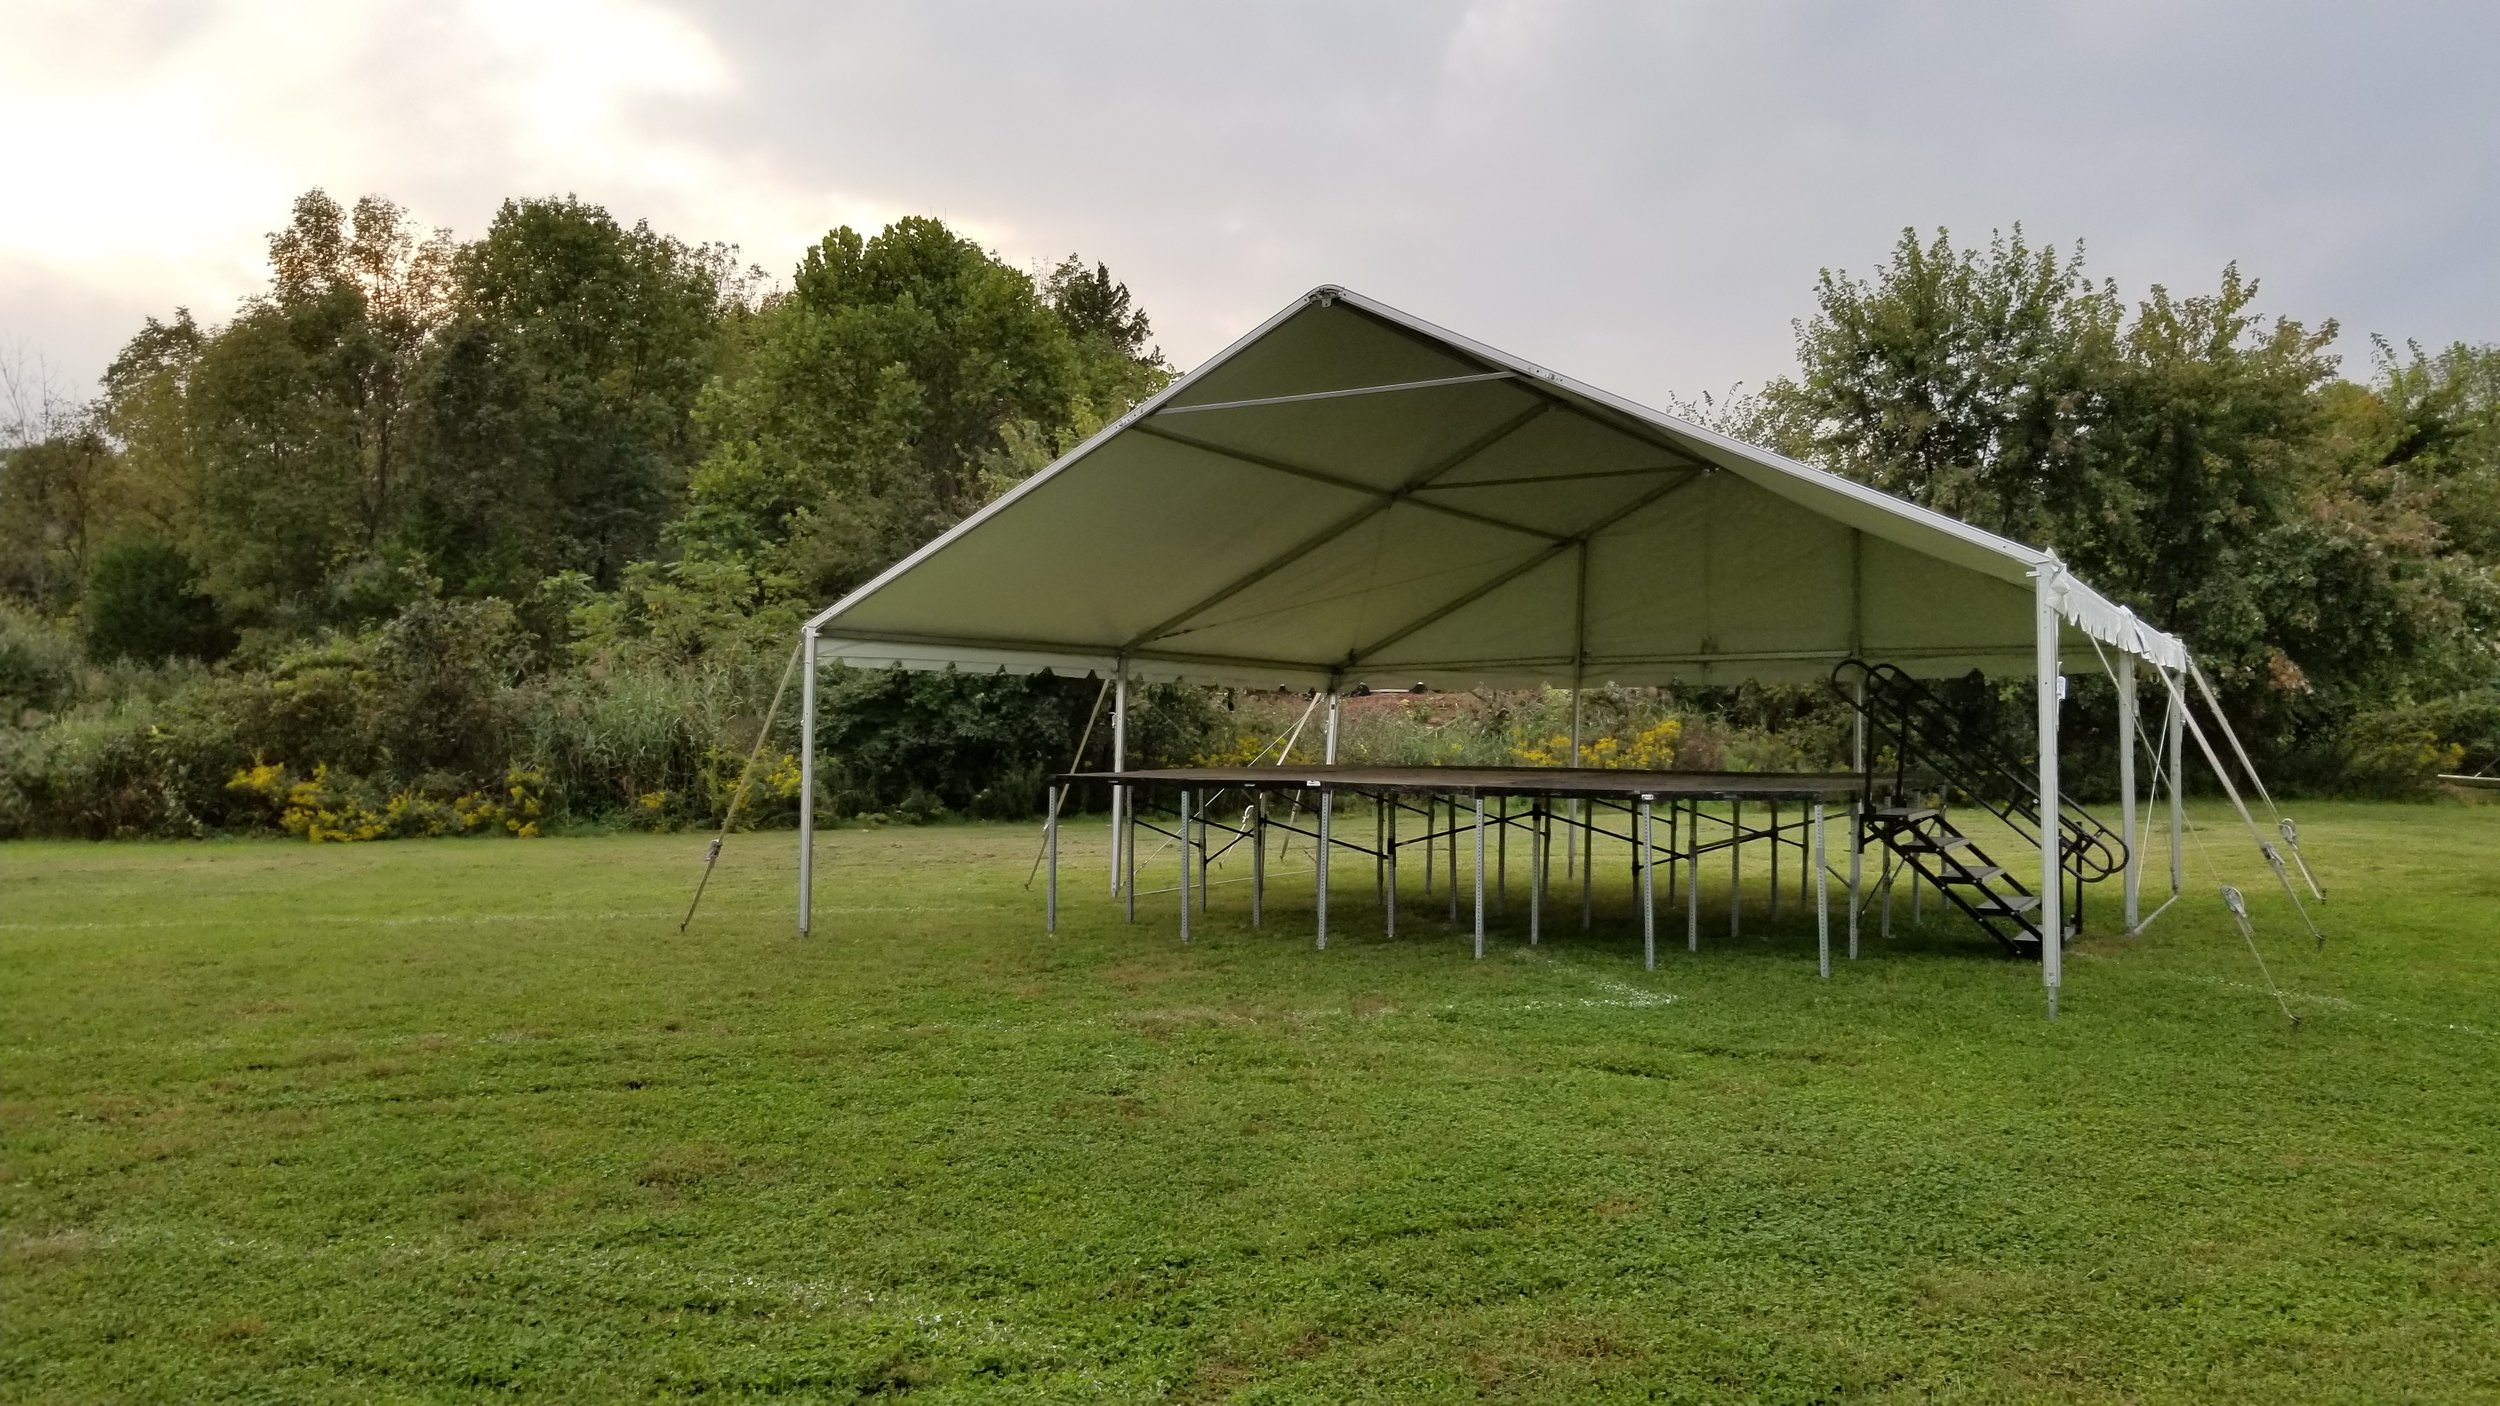 30' x 30' white frame tent with open gable and stage inside